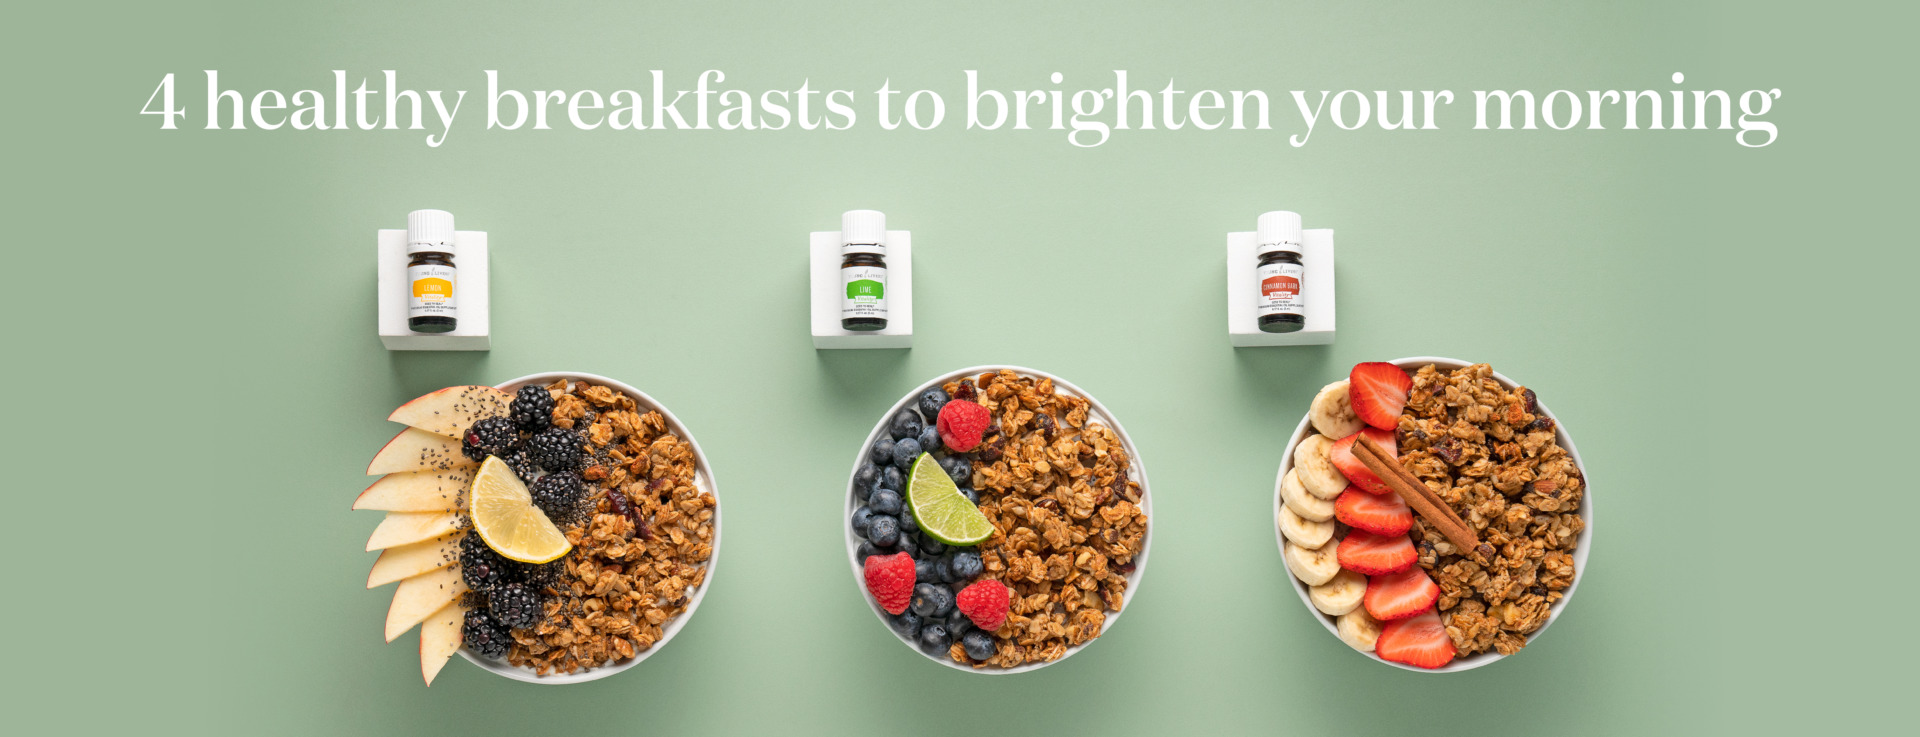 4 healthy breakfasts to brighten your morning - Young Living Lavender Life Blog